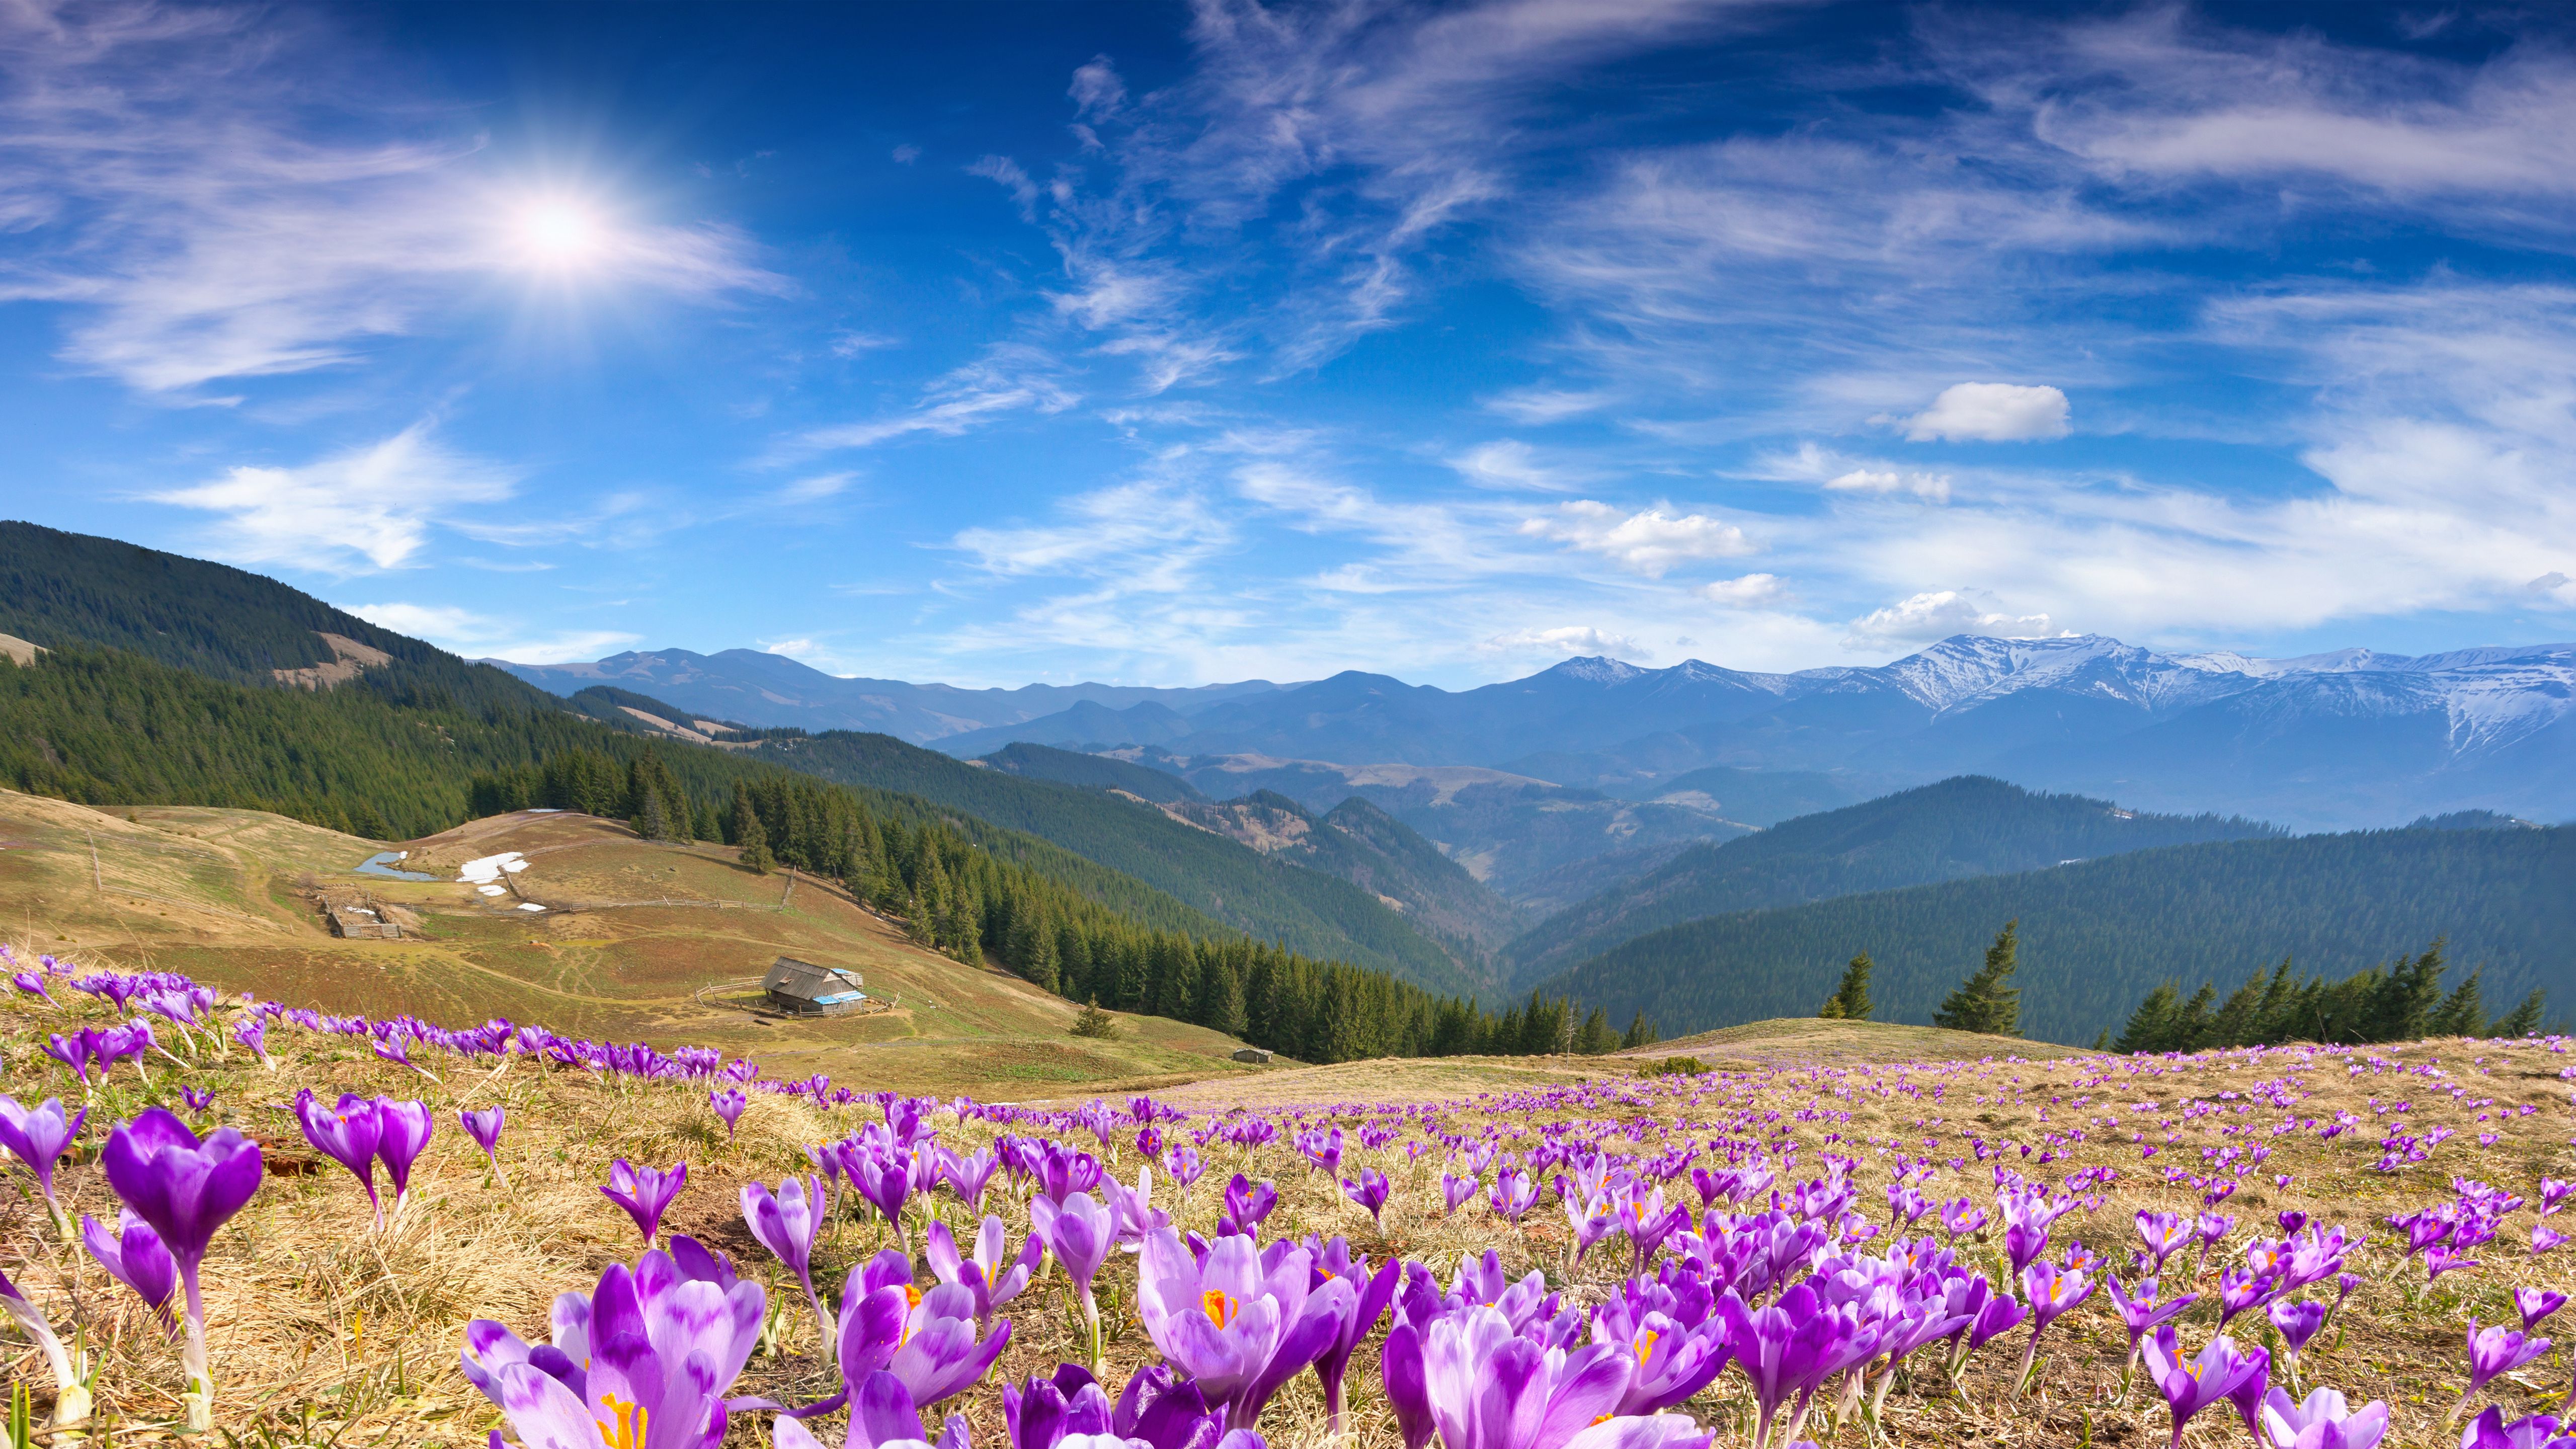 K, #Spring, #Mountains, #Sunny day, #Crocus flowers